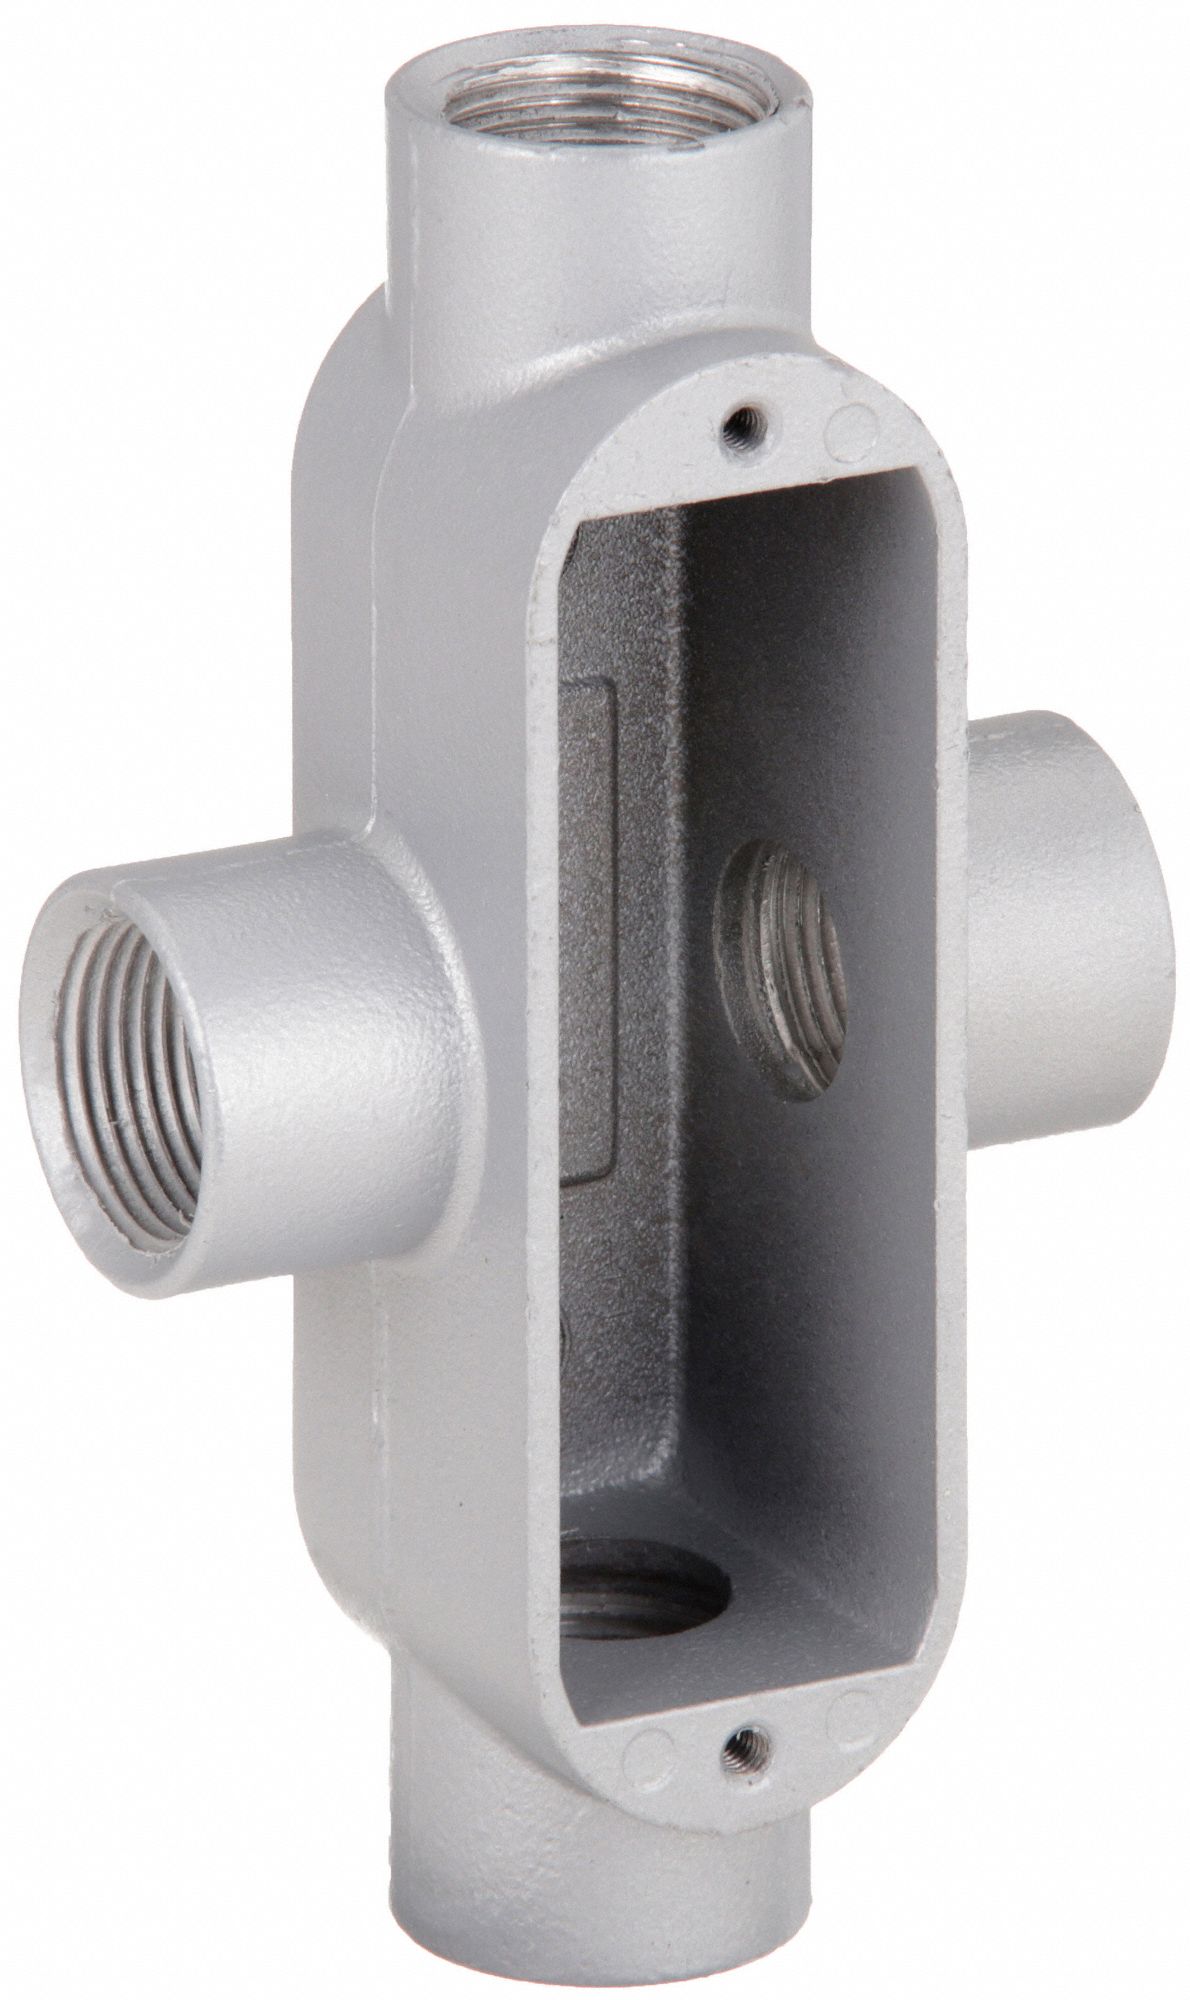 Conduit Outlet Body: Aluminum, 3/4 in Trade Size, X Body, 7 cu in Body  Capacity, Threaded Hub